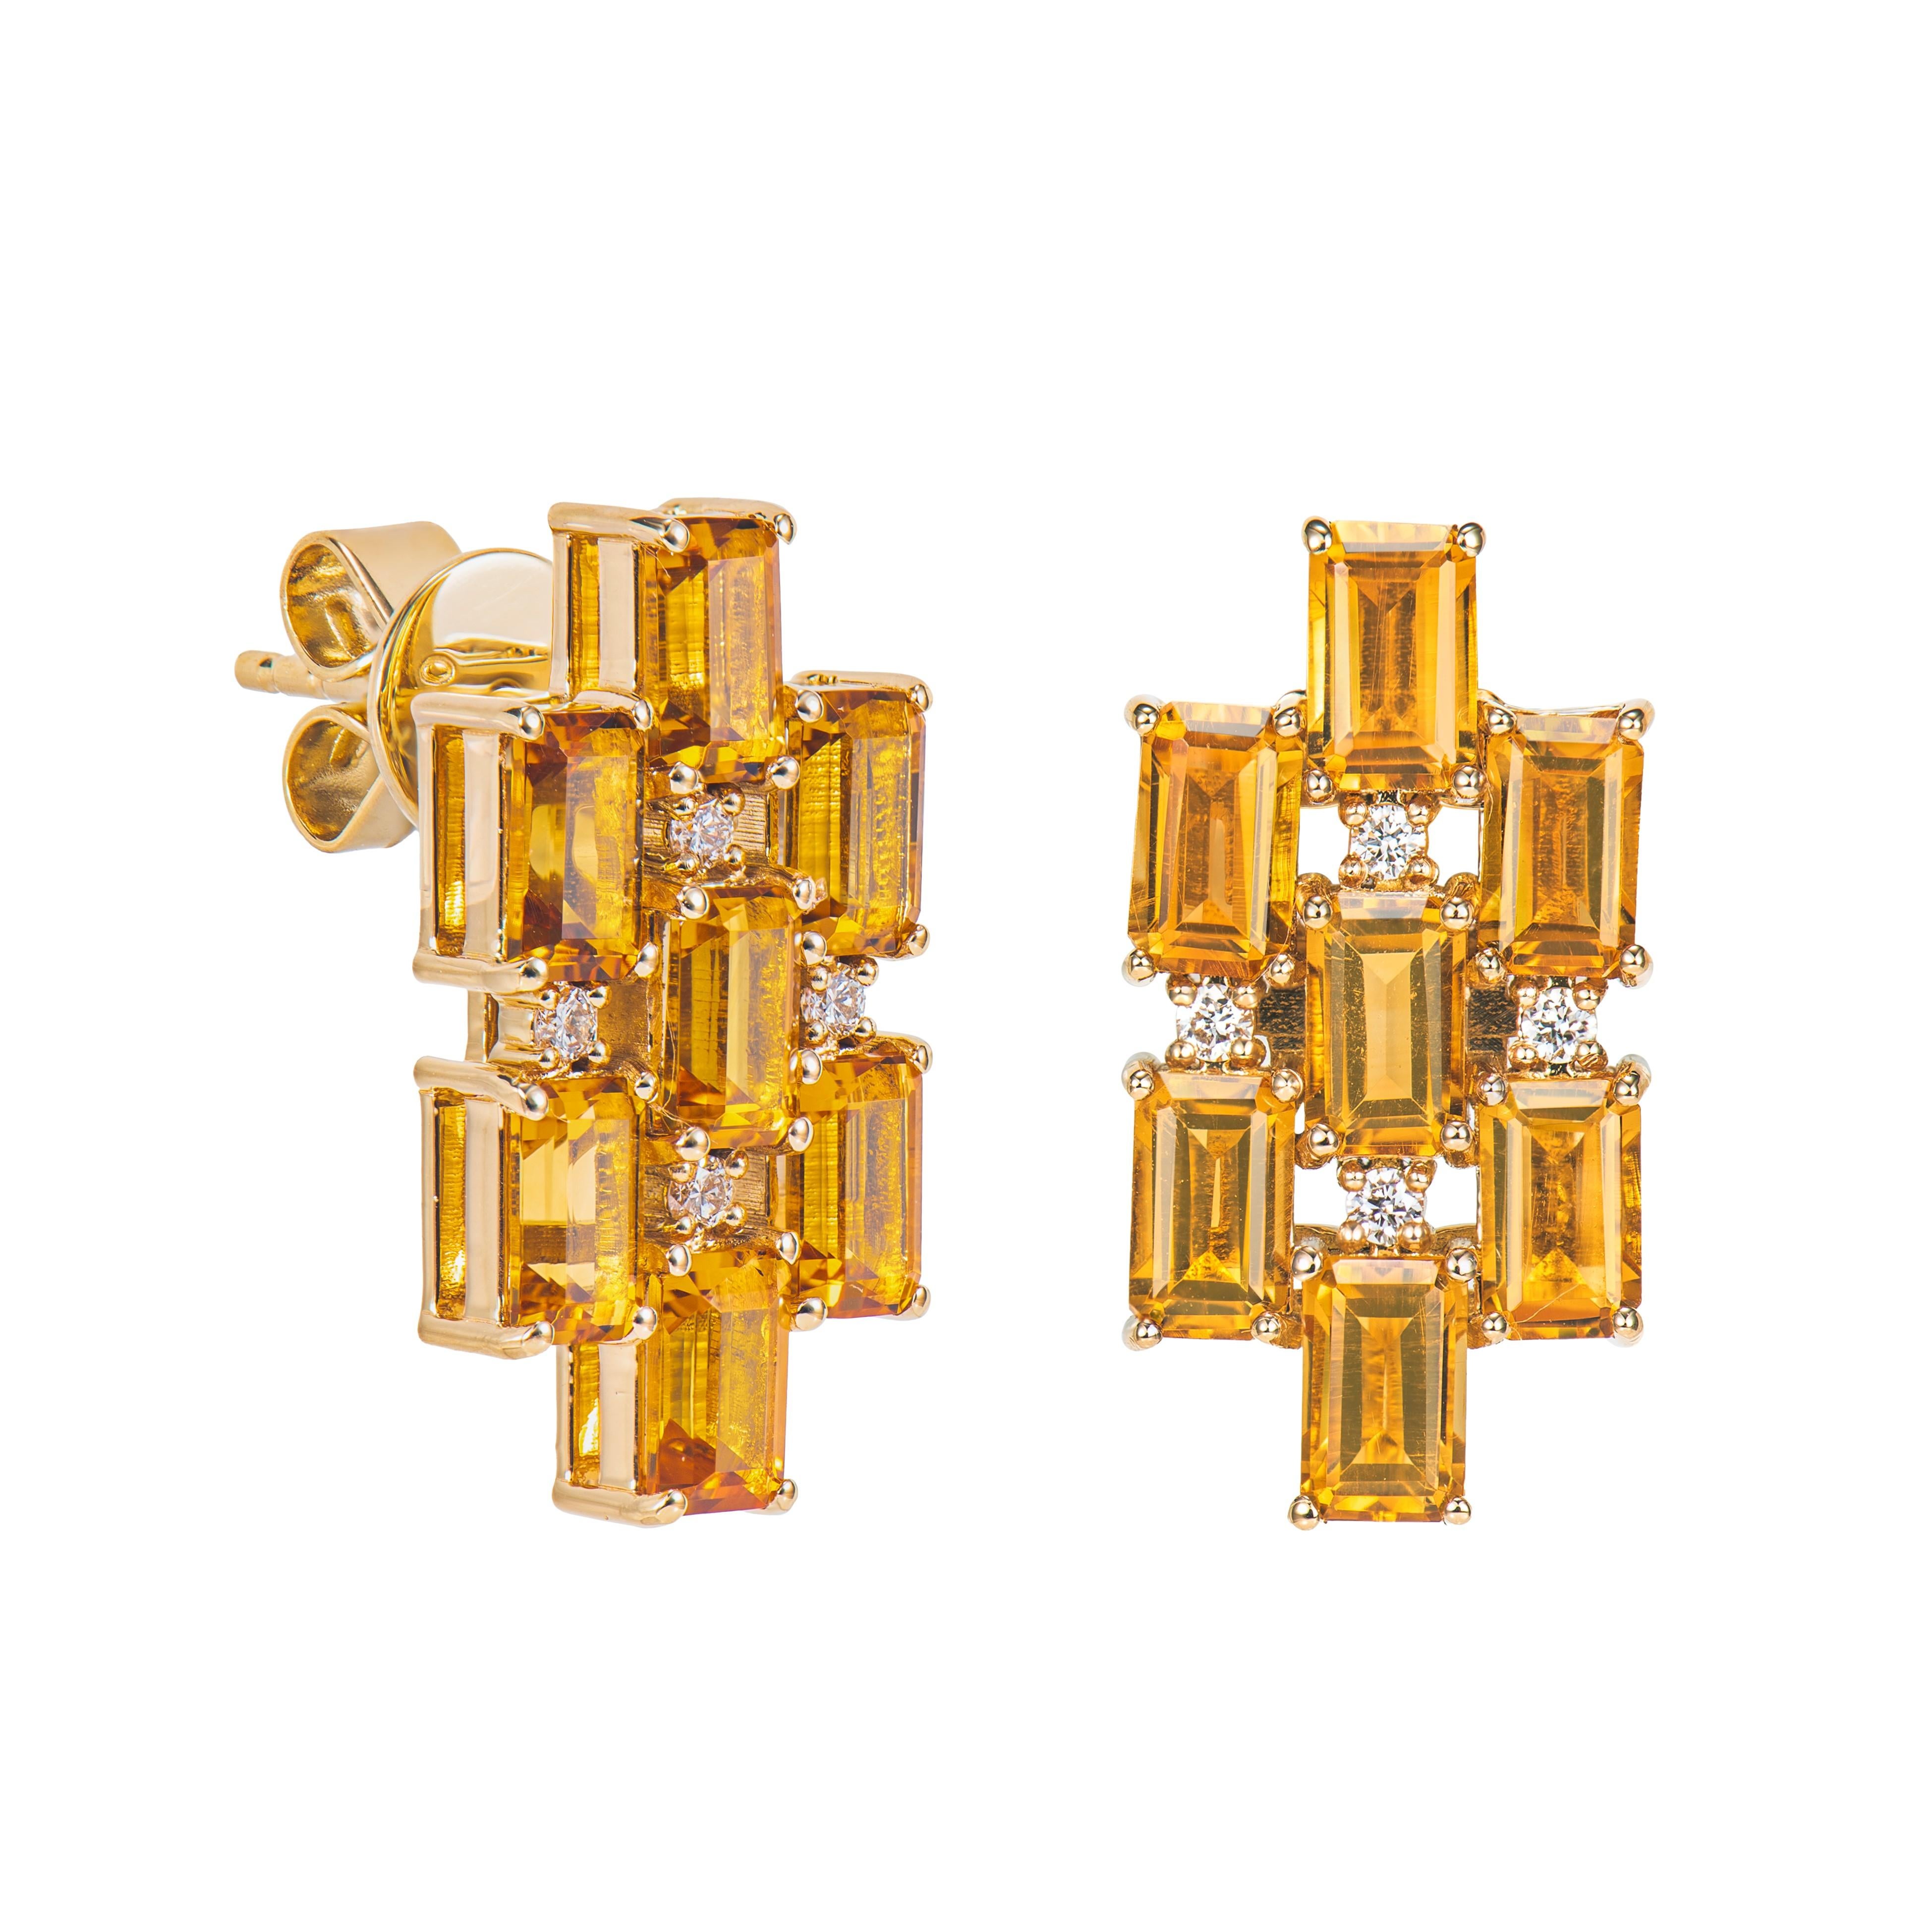 It is a fancy citrine earring in an octagon shape. This earring made of precious stone has a timeless, exquisite appeal that can be worn on a variety of occasions. Materials such as amethyst, citrine, and rhodolite are suitable. One of these is a